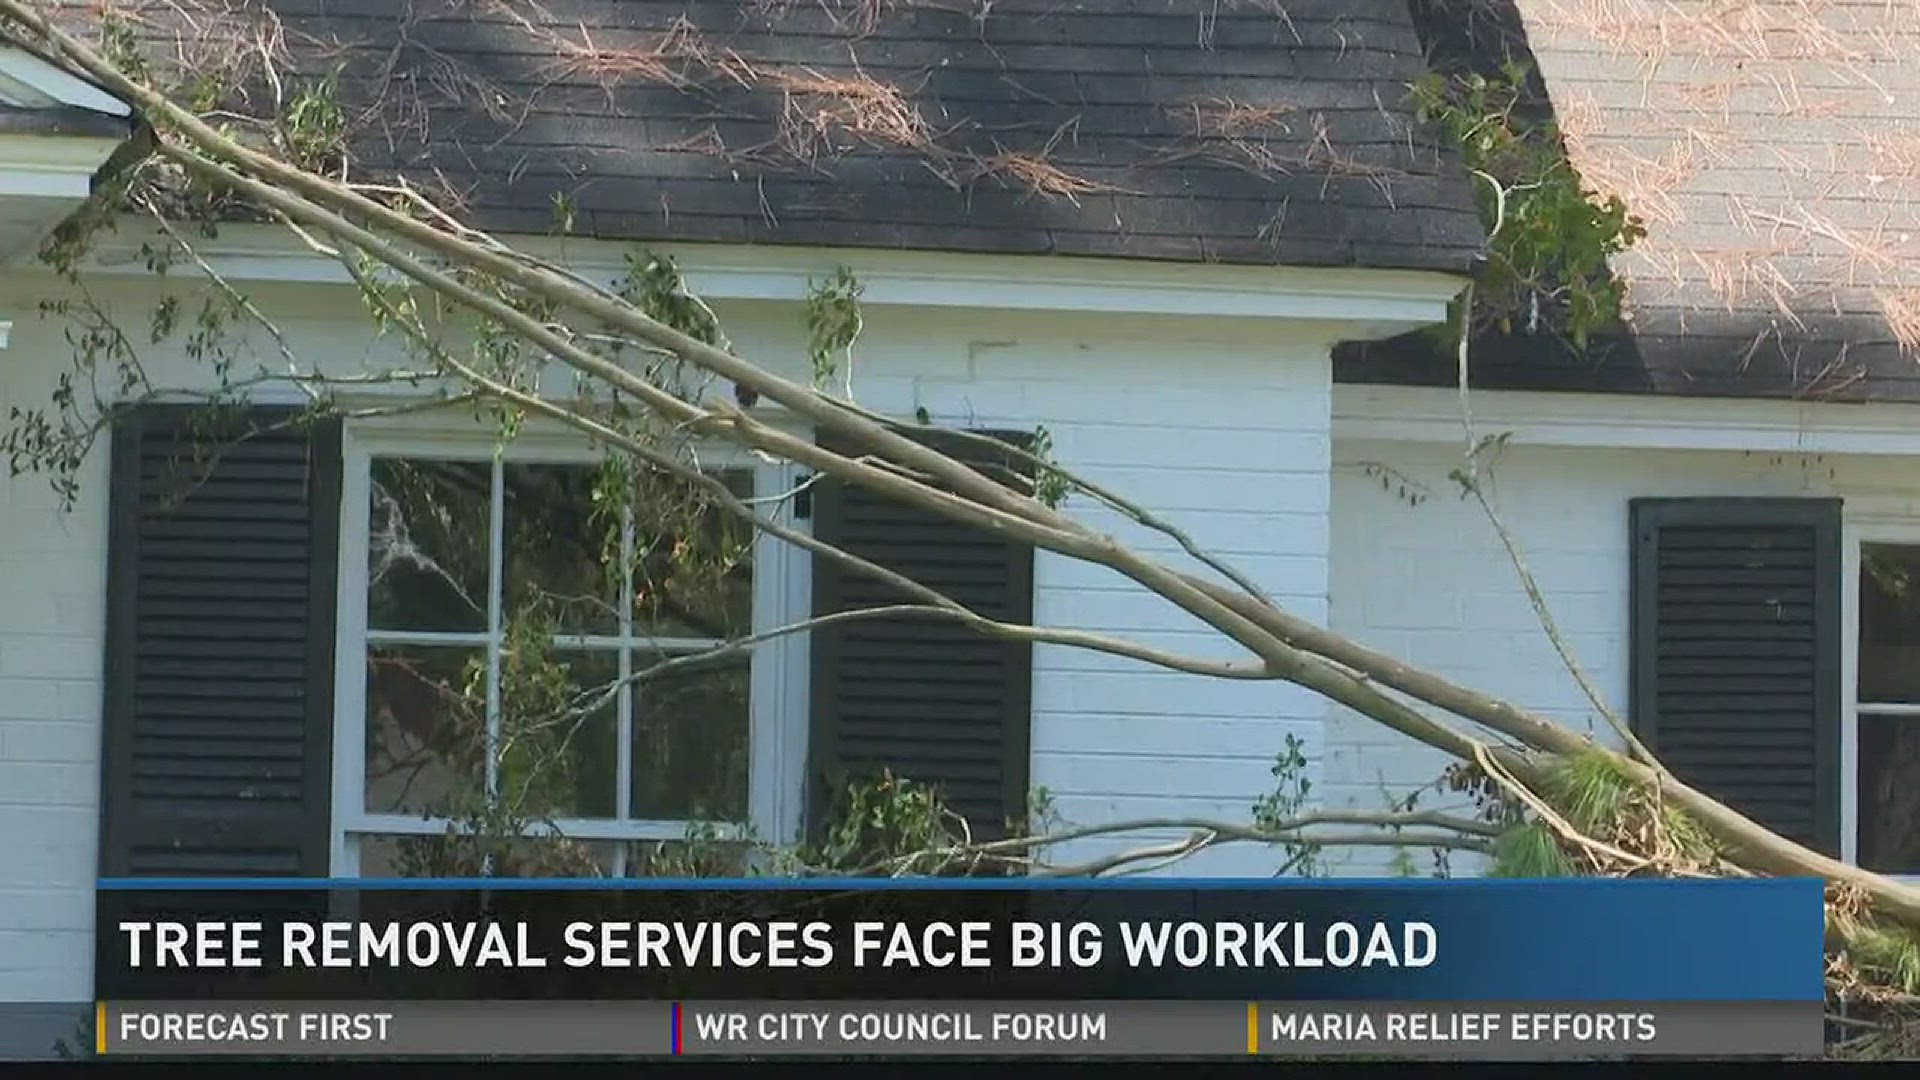 Tree removal services face big workload